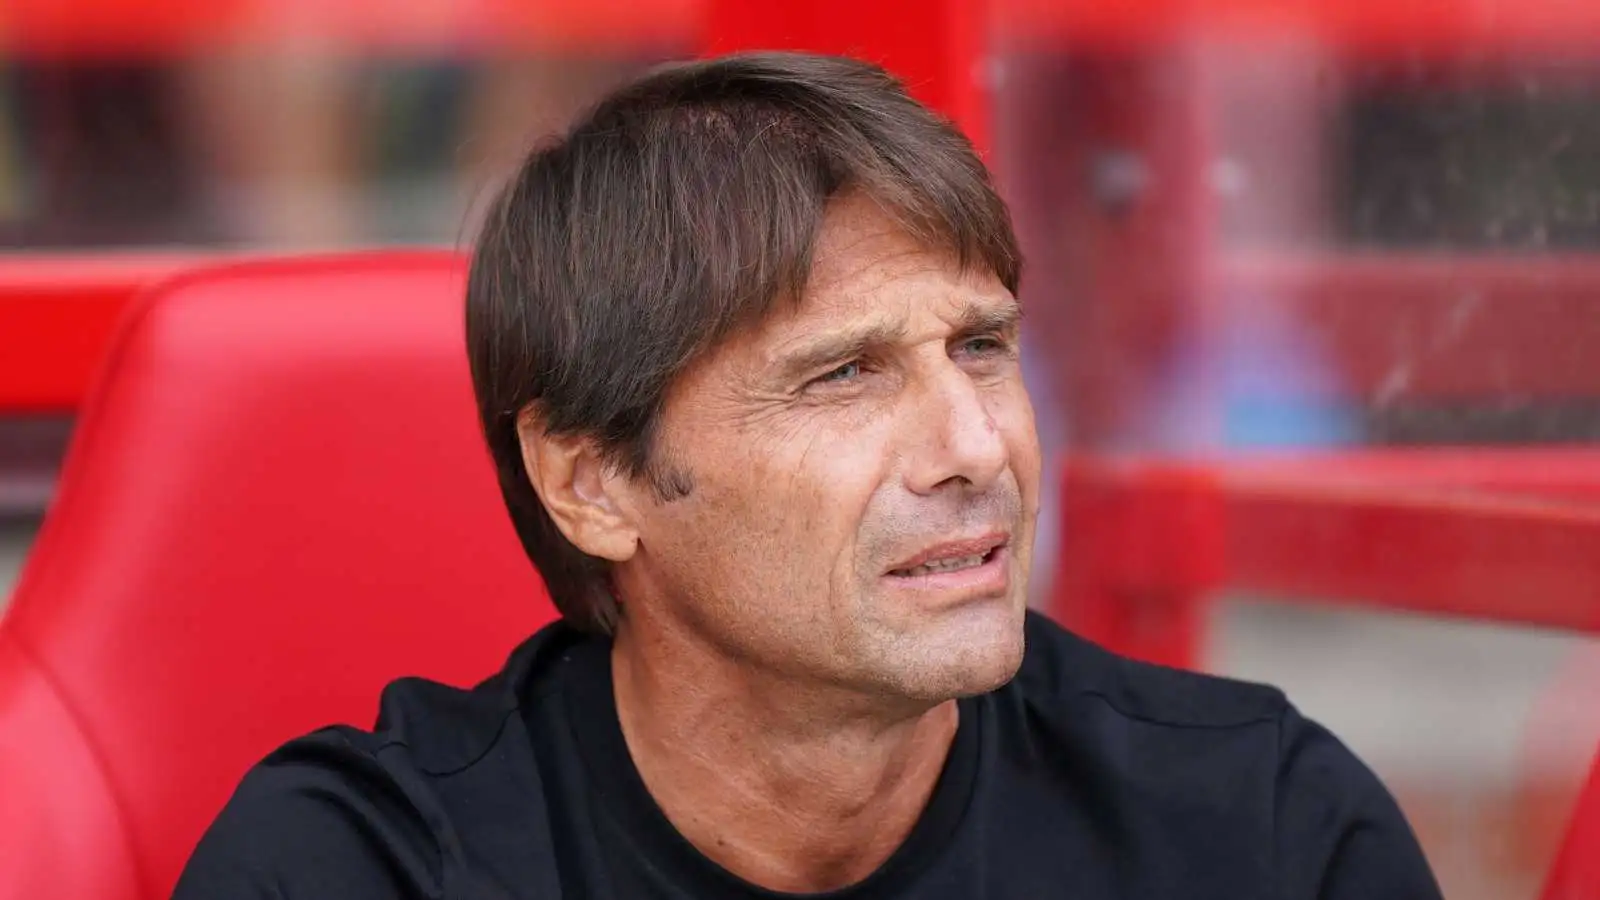 Conte agony after huge Tottenham transfer collapses, with Man Utd target now last-ditch plan B